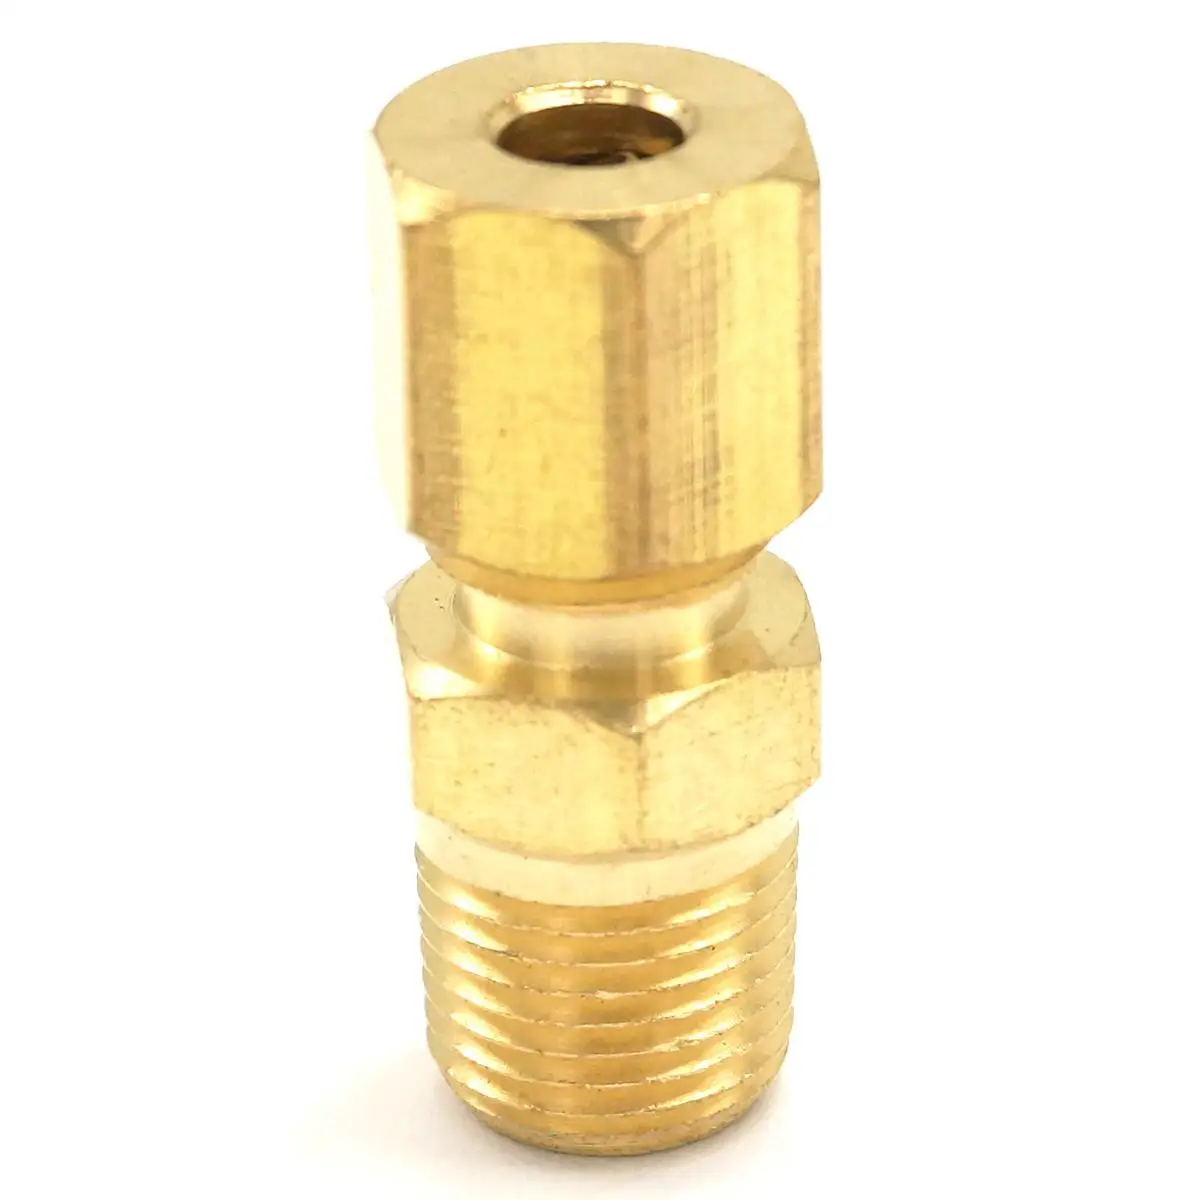 Brass Union Fitting Connector 3/16" Compression Tube X 1/8" NPT .~ 405" Adapter 